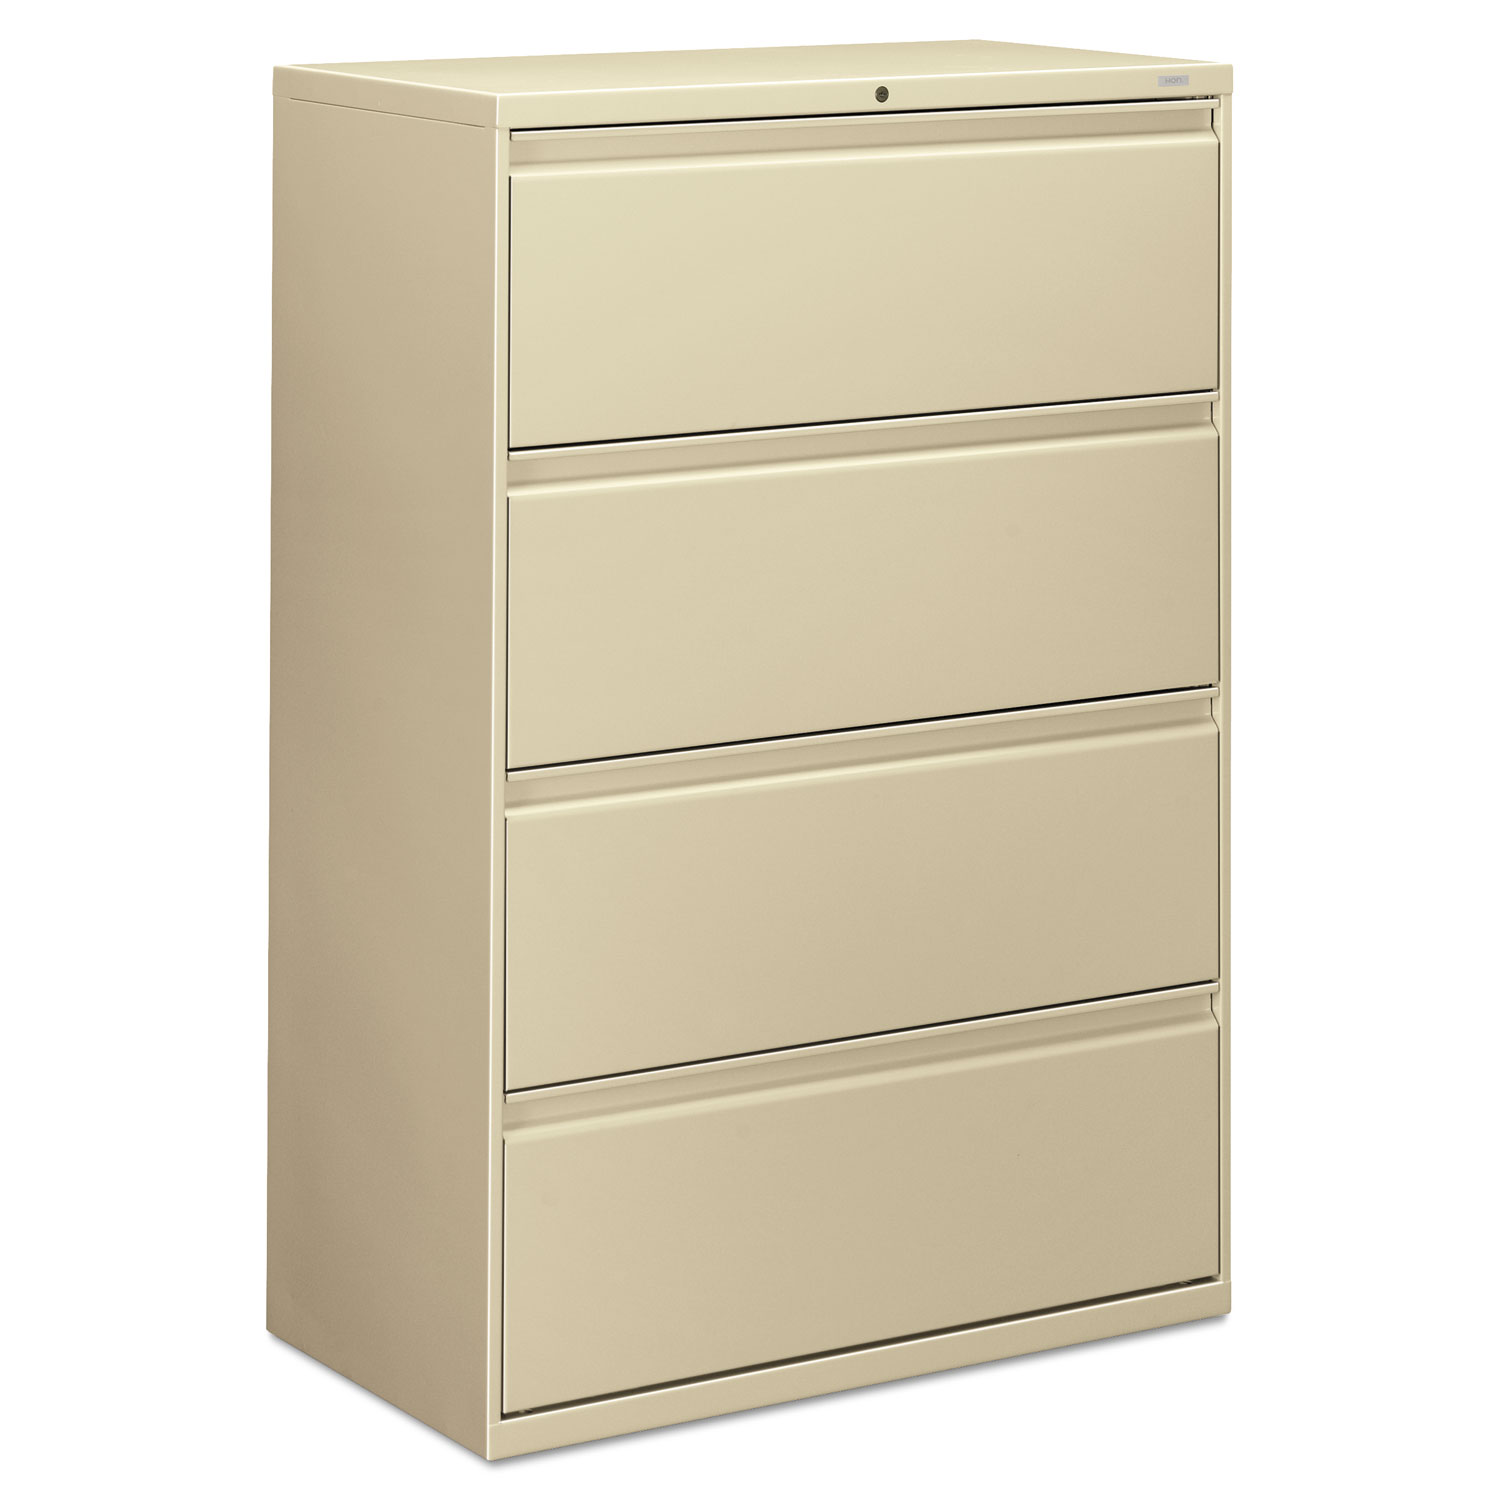 800 Series Four-Drawer Lateral File, 36w x 19-1/4d x 53-1/4h, Putty